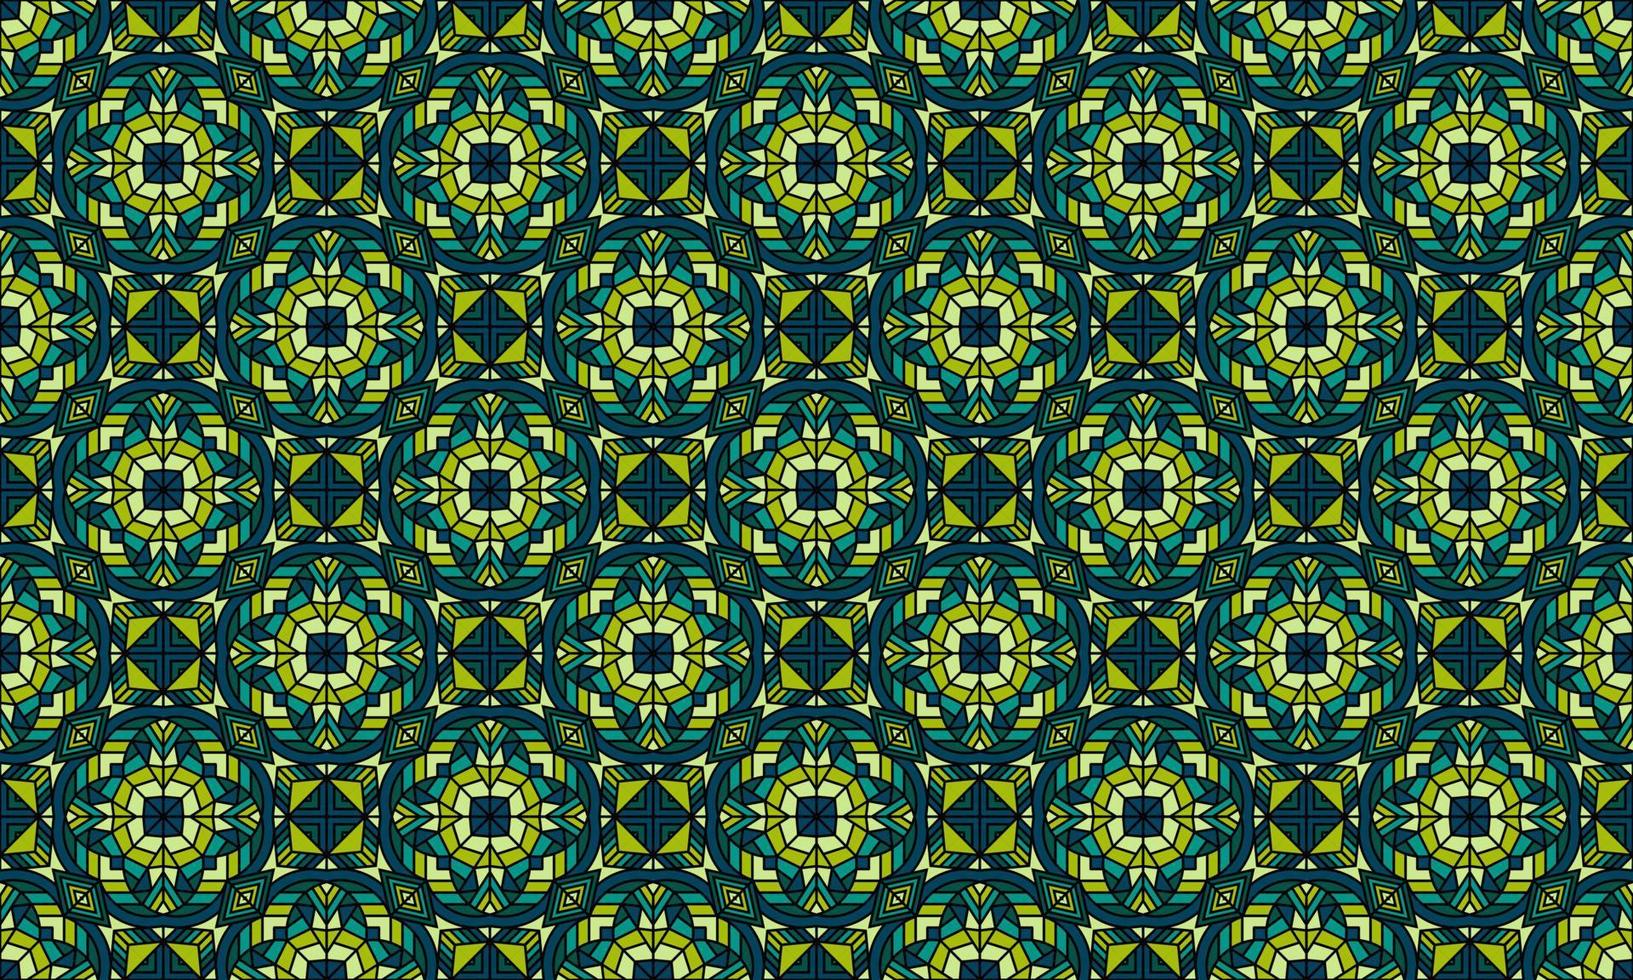 pattern unique traditional ethnic background vector